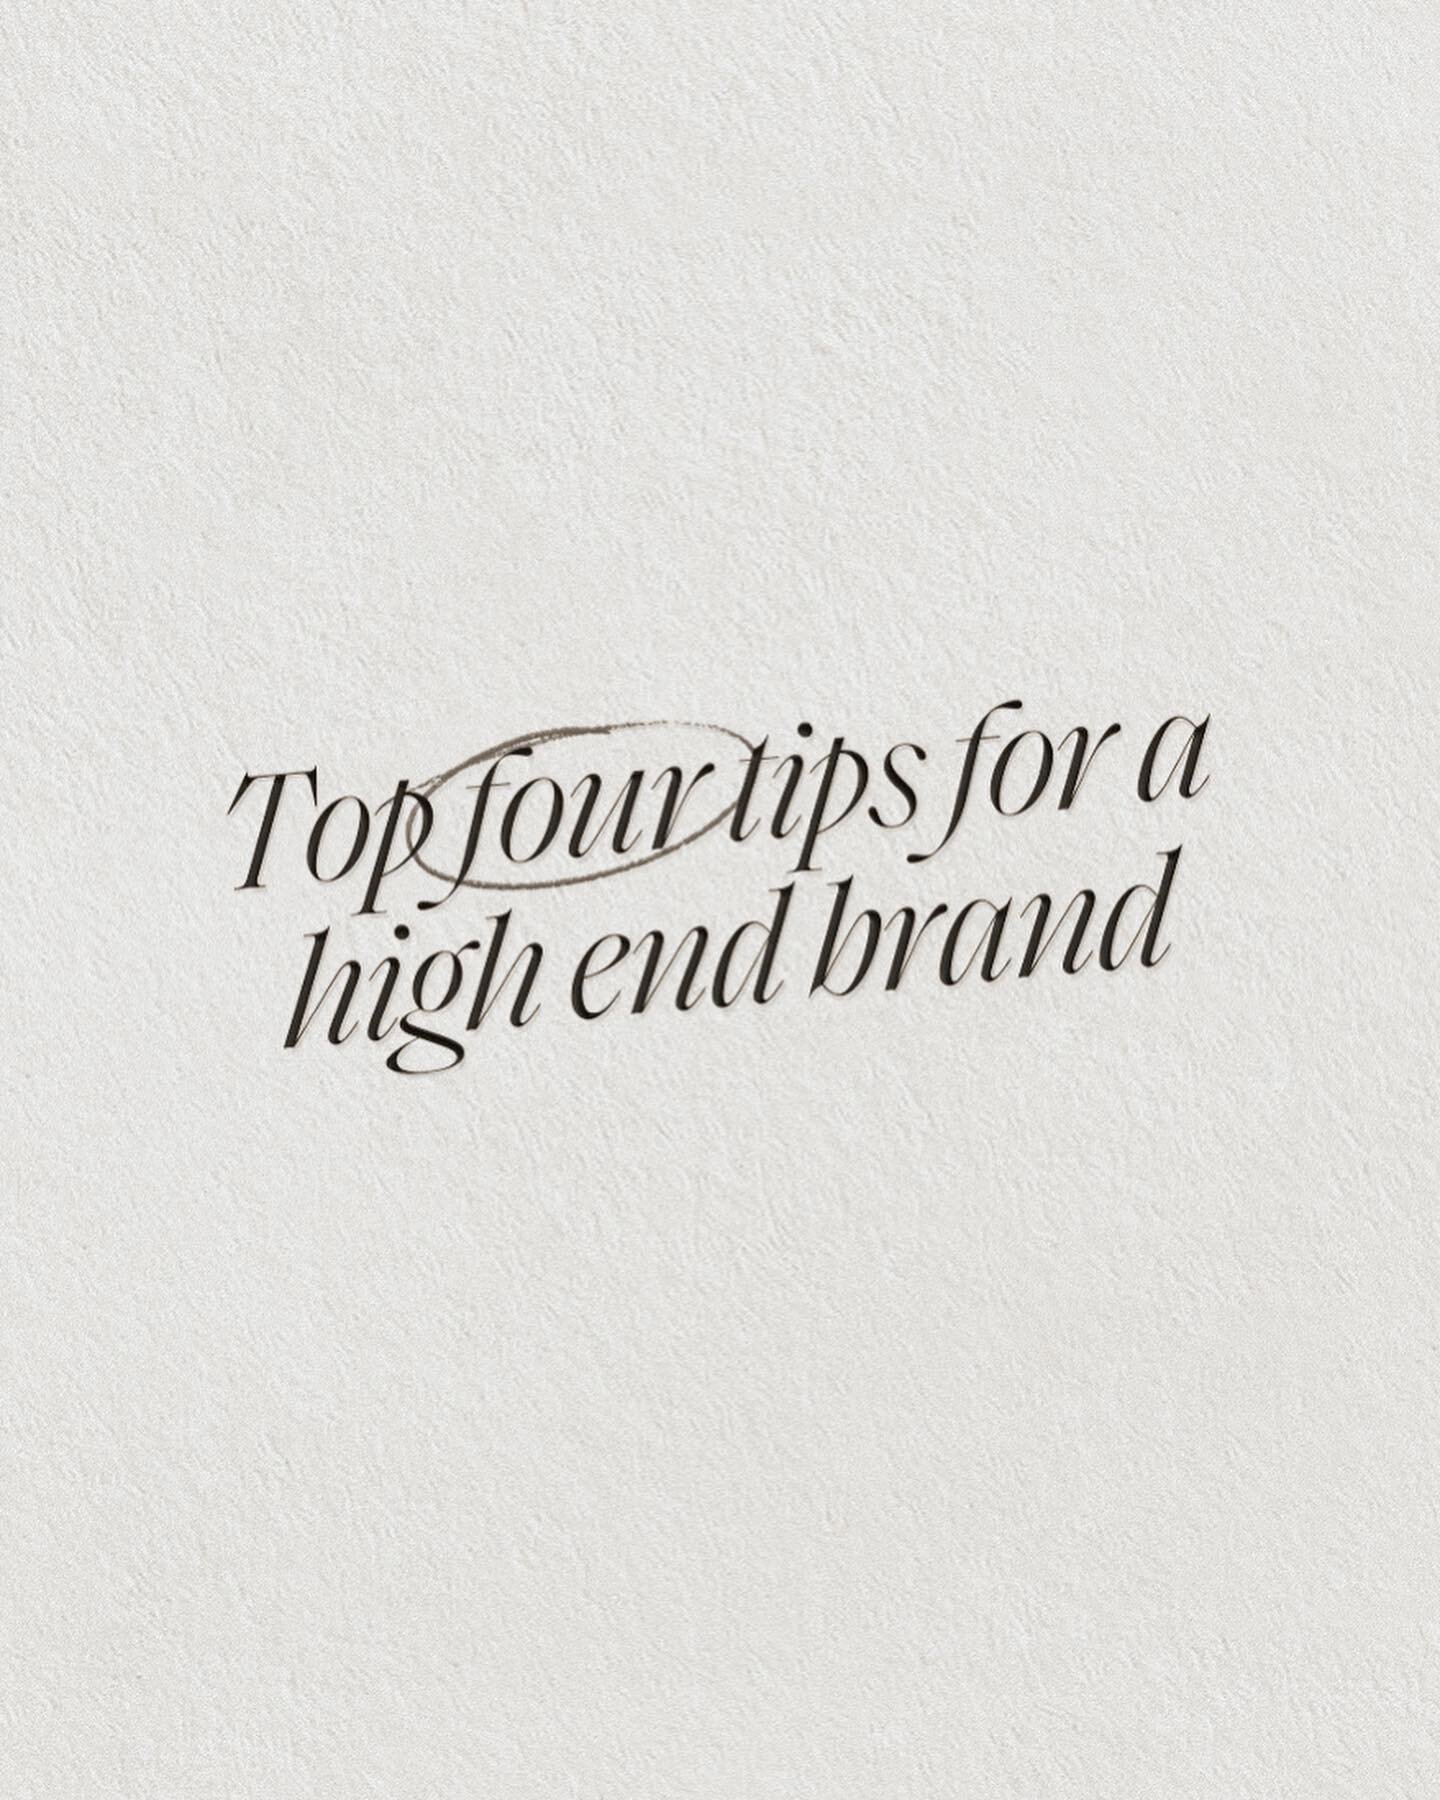 No. 2 &mdash;&gt; Say it louder for people in the back!!! I promise it&rsquo;s true 🖤 Our top four tips for a truly high end brand experience 🥂 

 .
.
.
.
#brandidentity #luxurybranddesign #brandstudio #designinspiration #luxurybranding #branding #